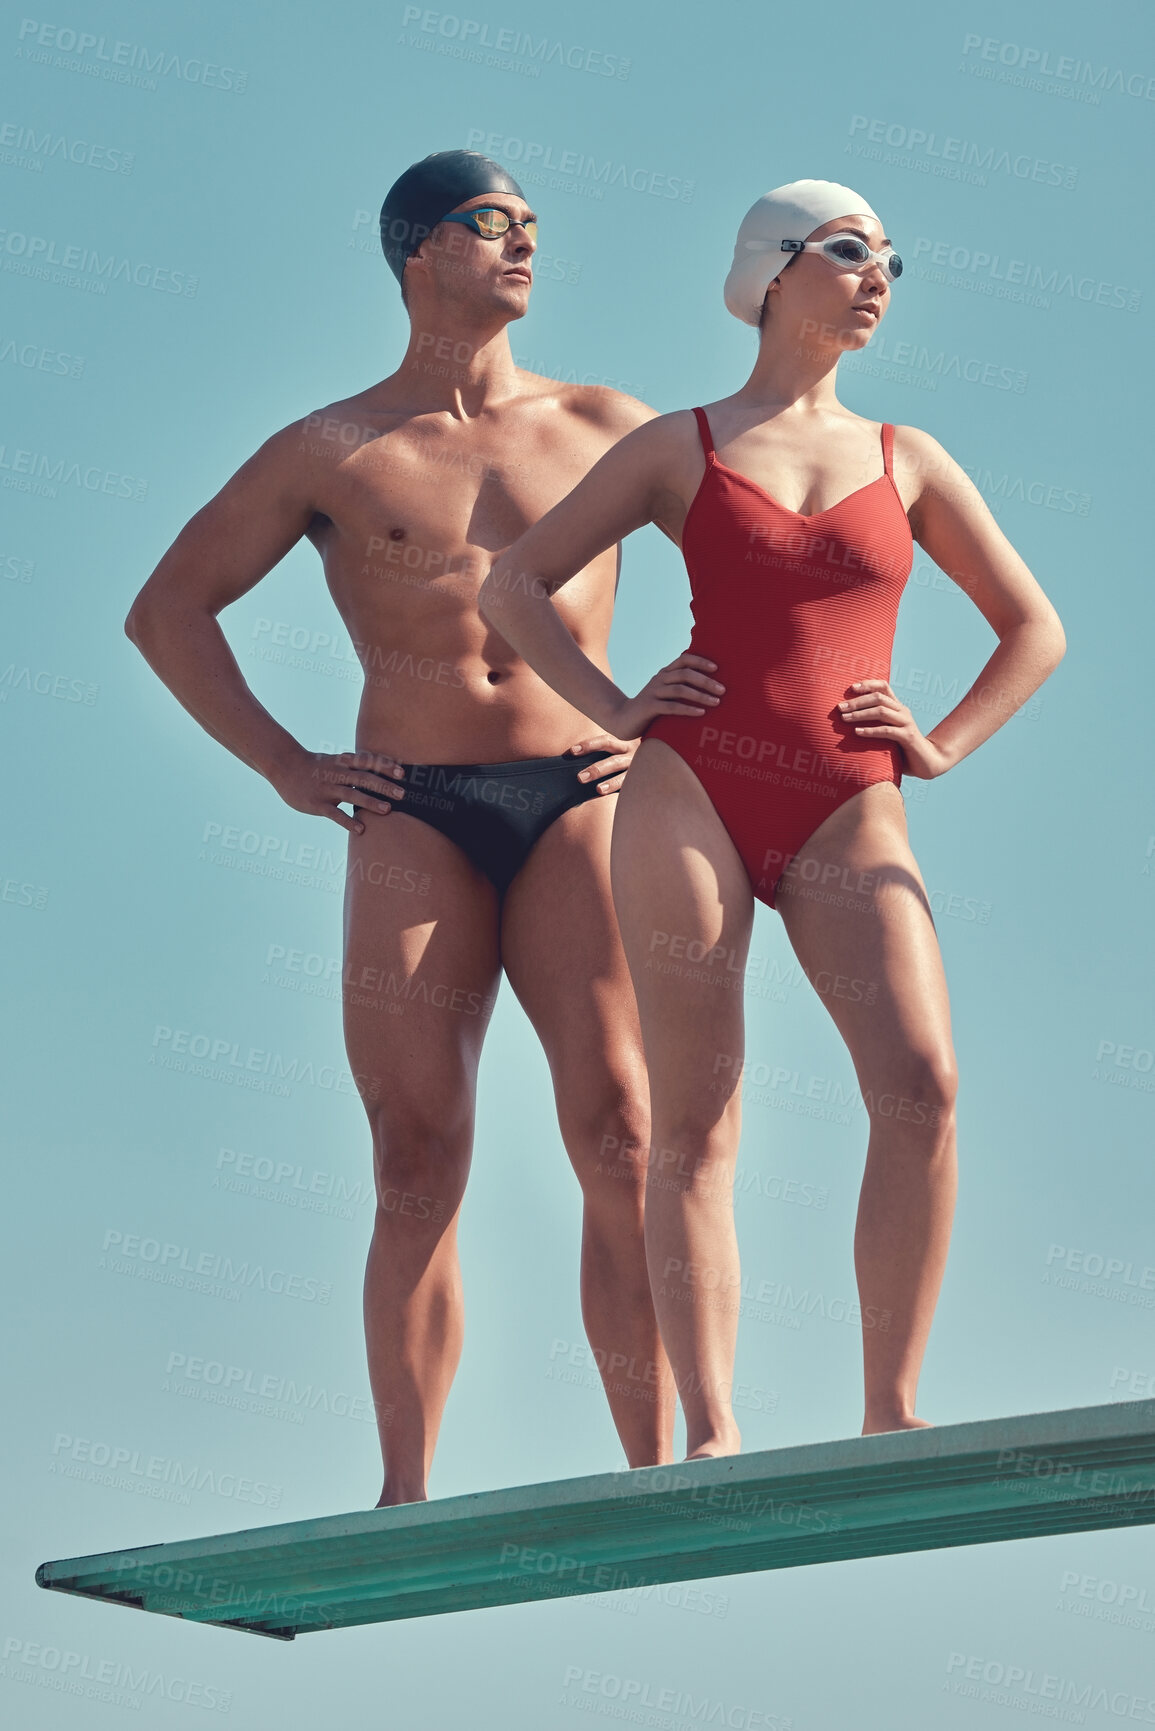 Buy stock photo Full length shot of two young athletes standing on a diving board outside